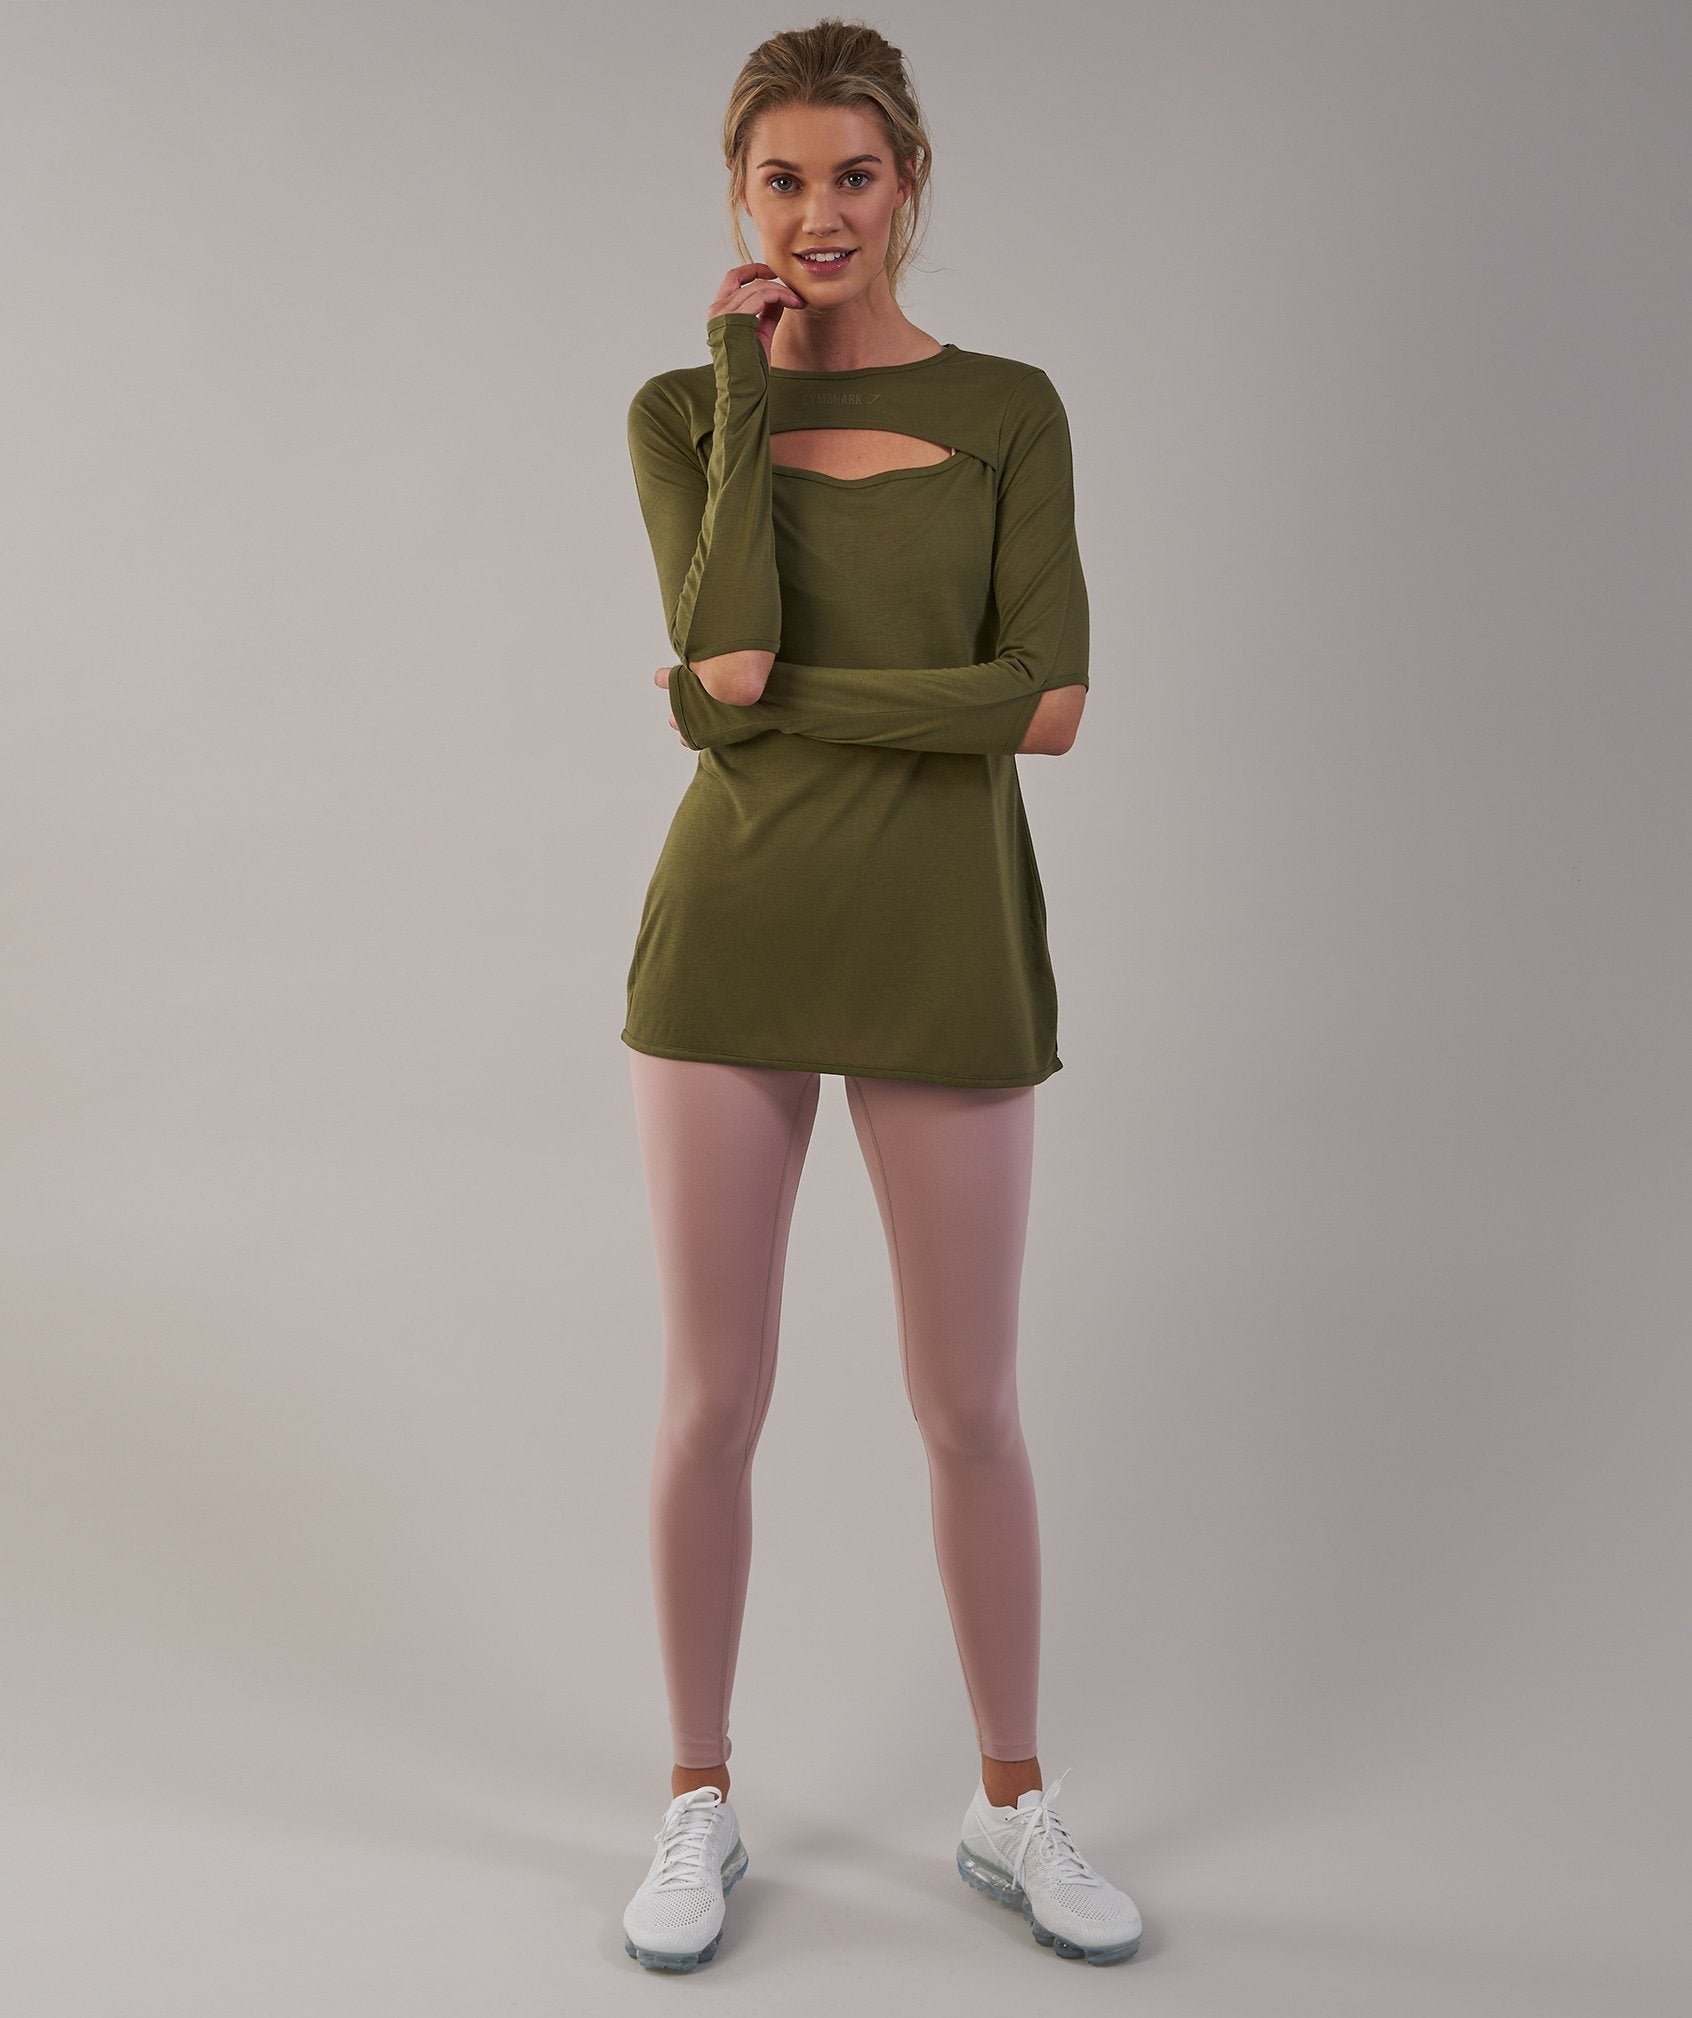 Cut Out Long Sleeve in Khaki - view 4